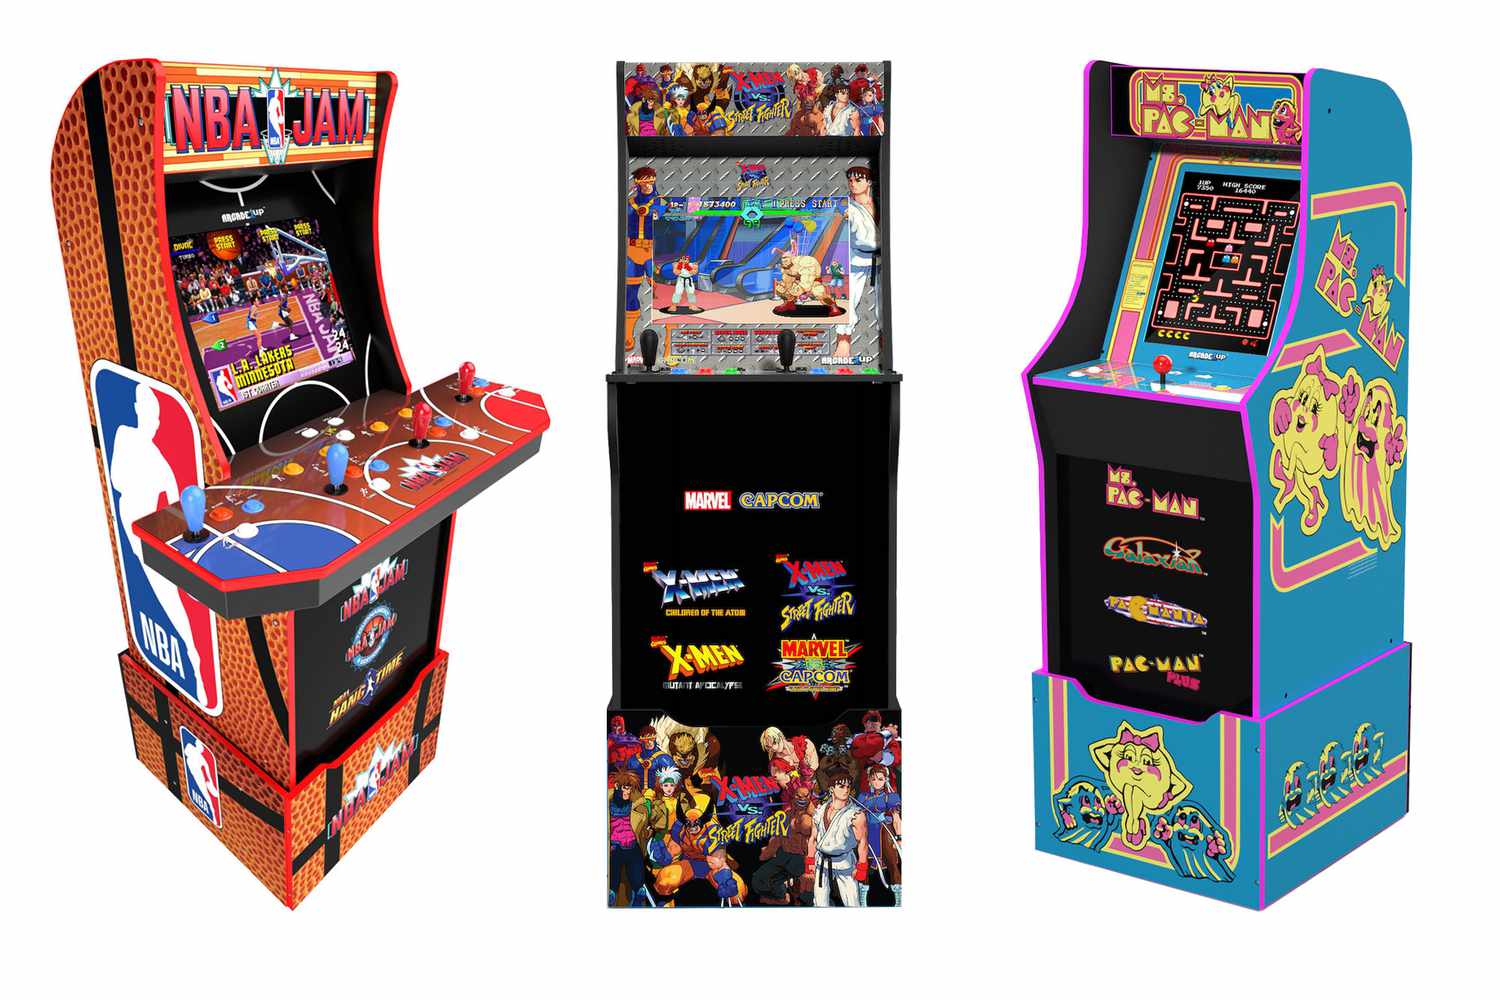 Set up a home arcade with these retro game machines from Walmart | EW.com